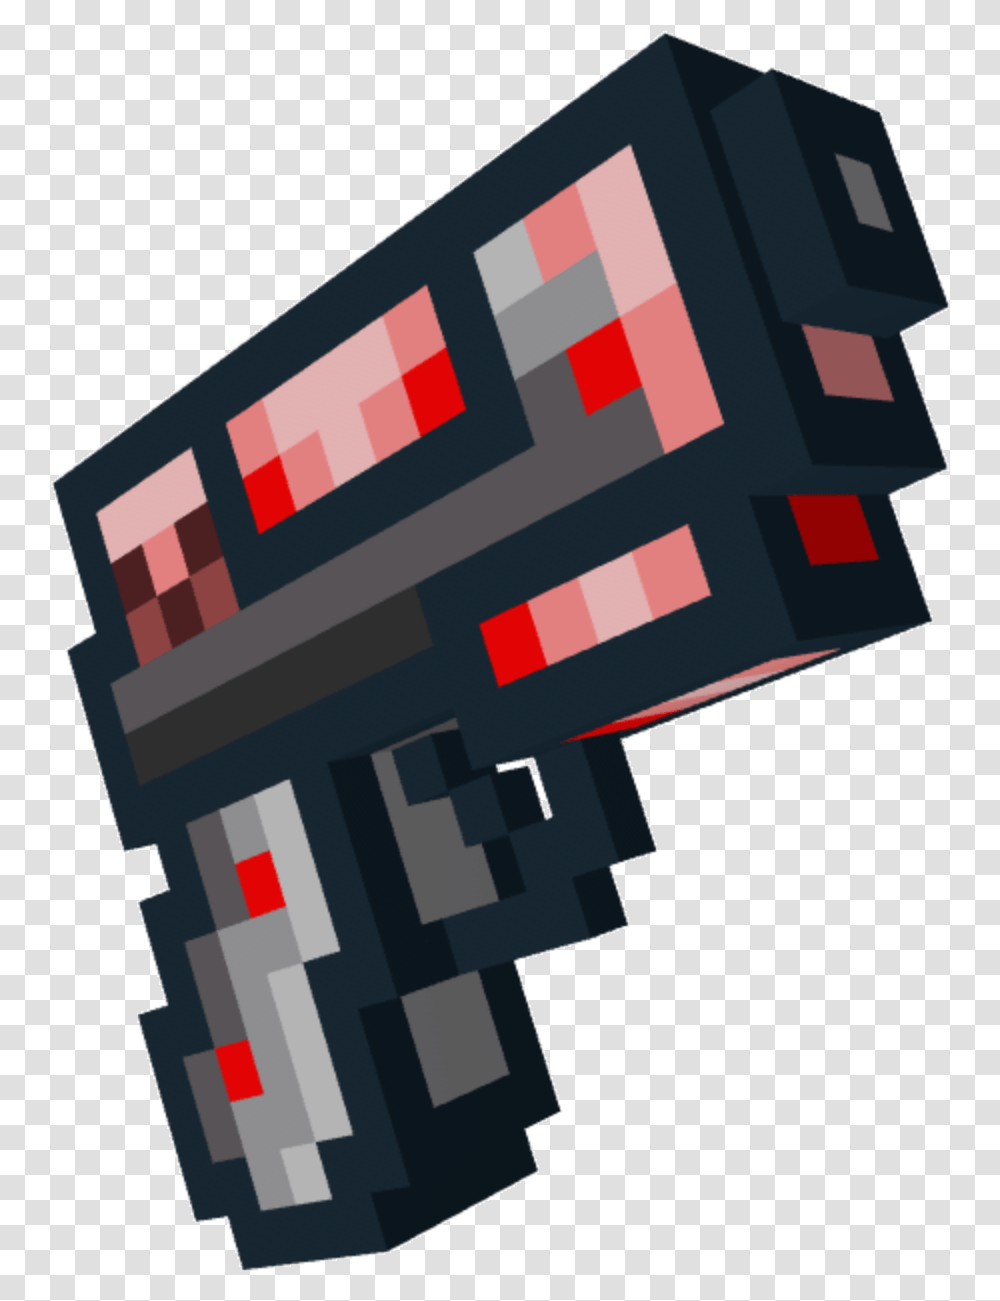 Share Pixel Gun Conceptions Here Illustration, Minecraft Transparent Png